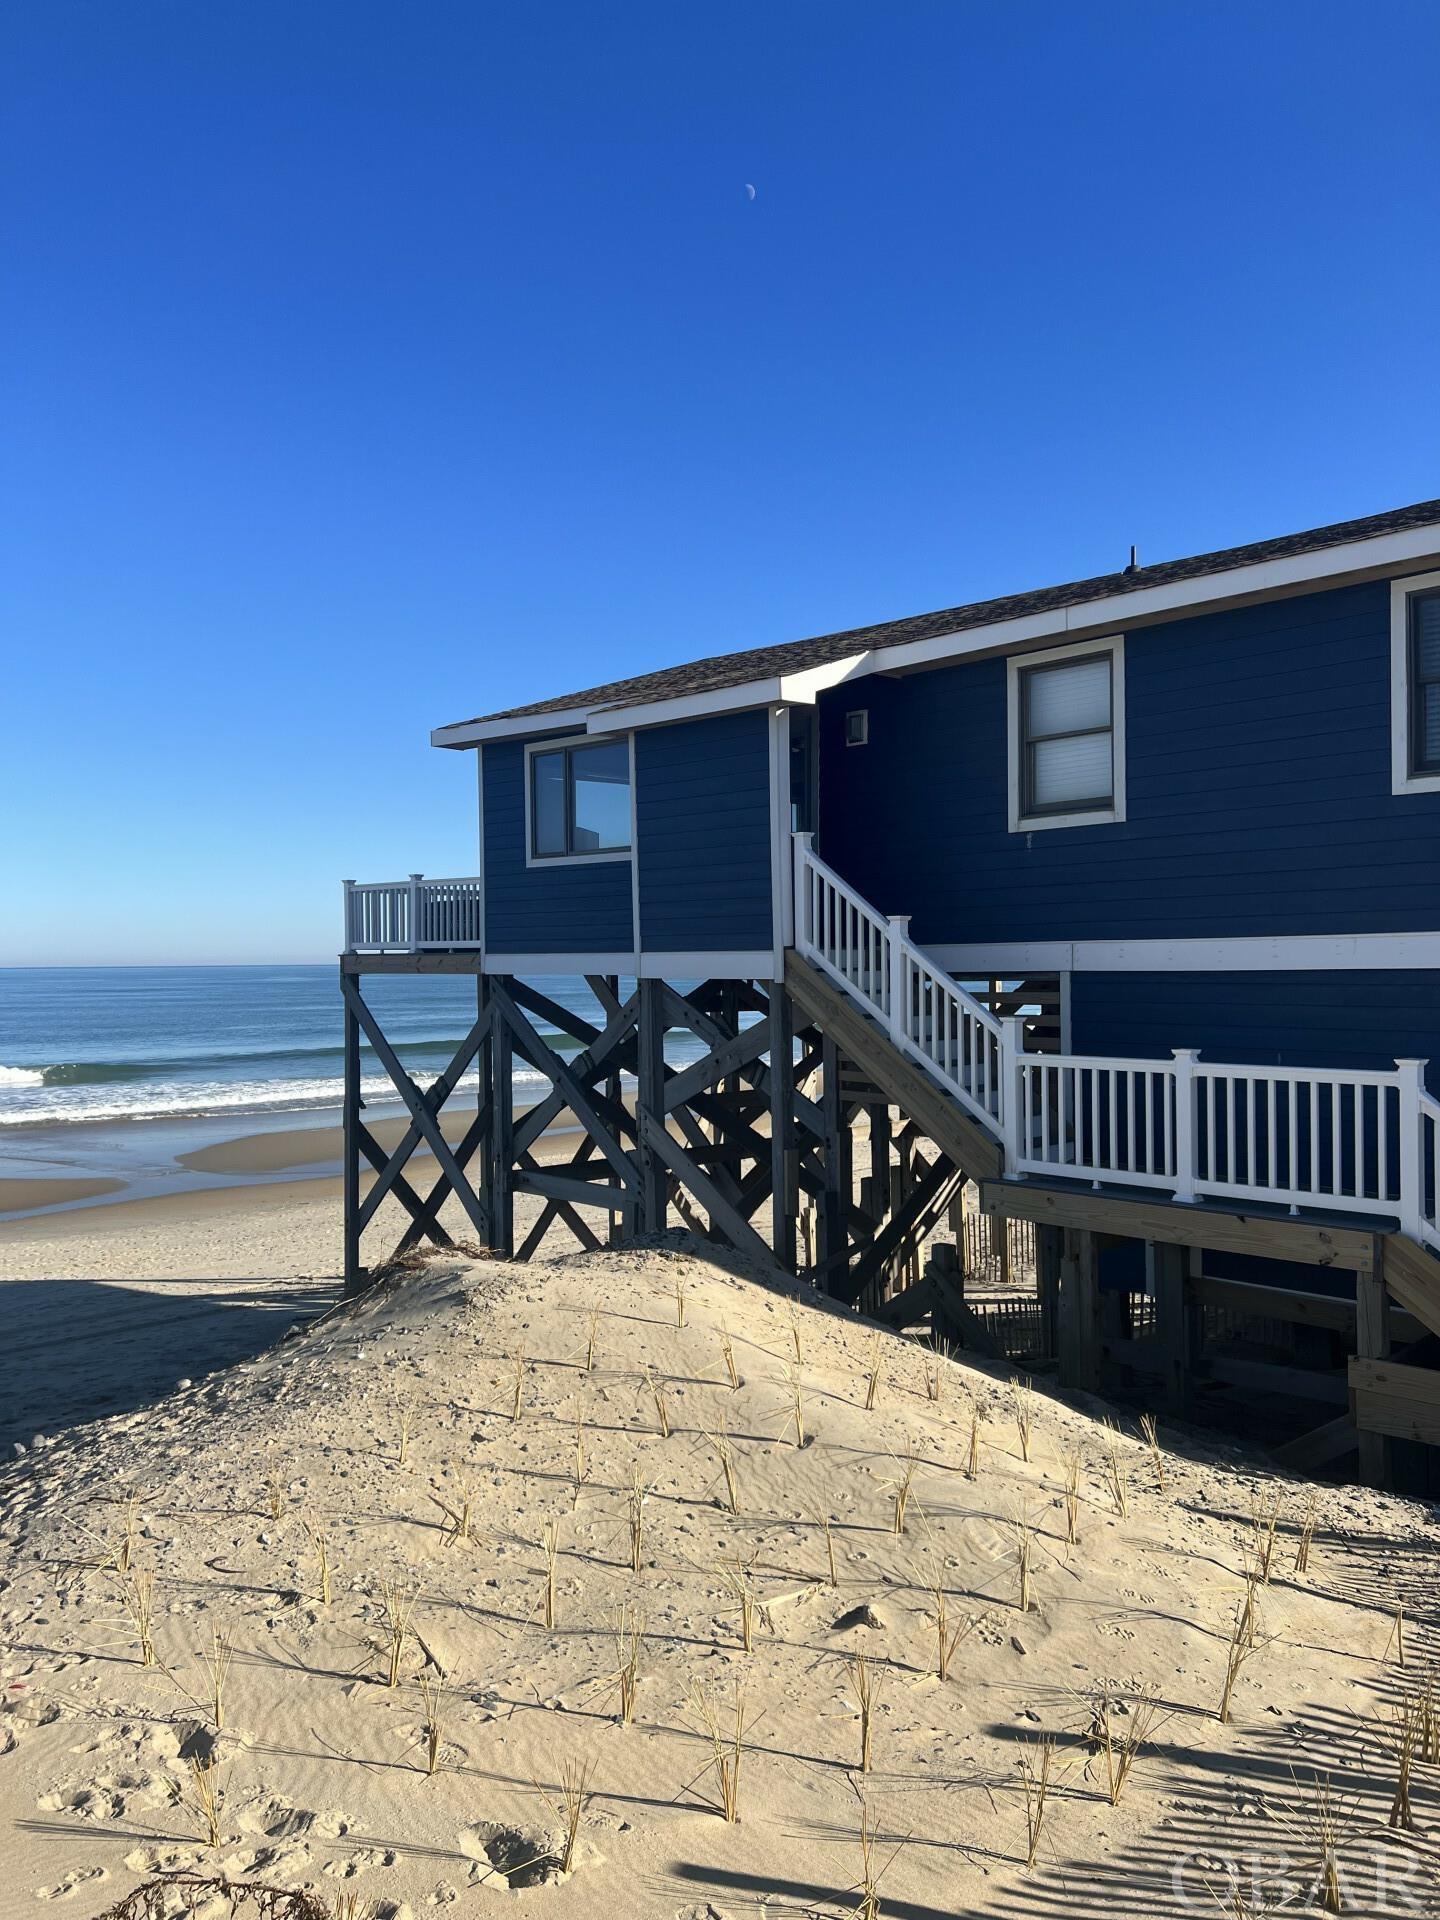 Sold furnished with the exception of a few personal items from seller to be removed prior to sale. 3 bedroom/1.5 bath ocean front income producing STR approved cottage MP 19 S Nags Head w/ 100k in revenue a year being generated. Owners are willing to teach new owners their successful self managing system for maximum income potential/gains. Major 2022 renovation for both structural and cosmetic items completed. Property has benefited greatly from the Beach Nourishment efforts for the OBX!  Assumable FEMA policy and mortgage with excellent rates!